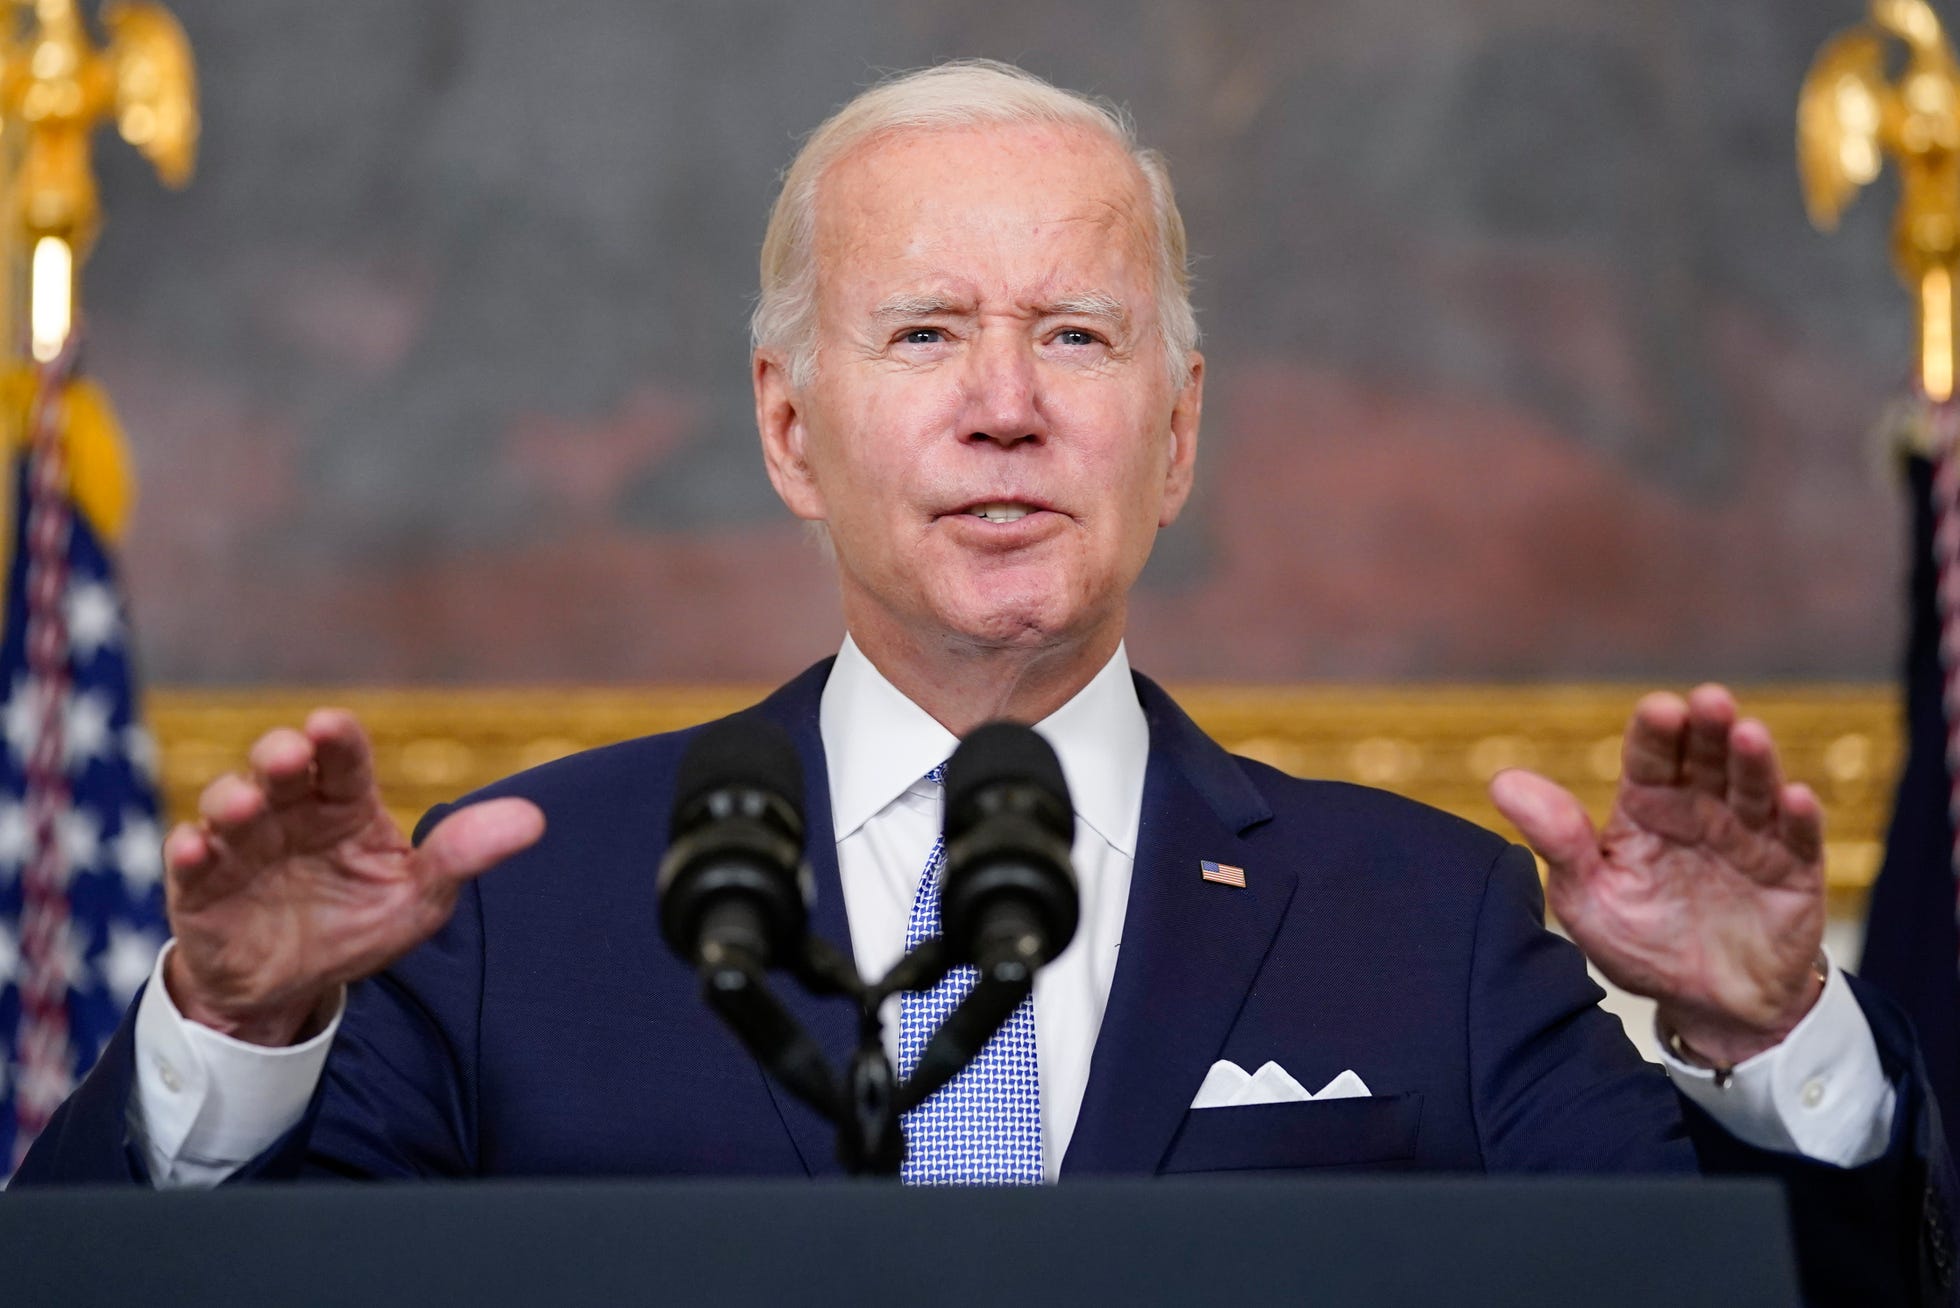 Americans oppose a BidenTrump rematch in 2024. That has to matter.